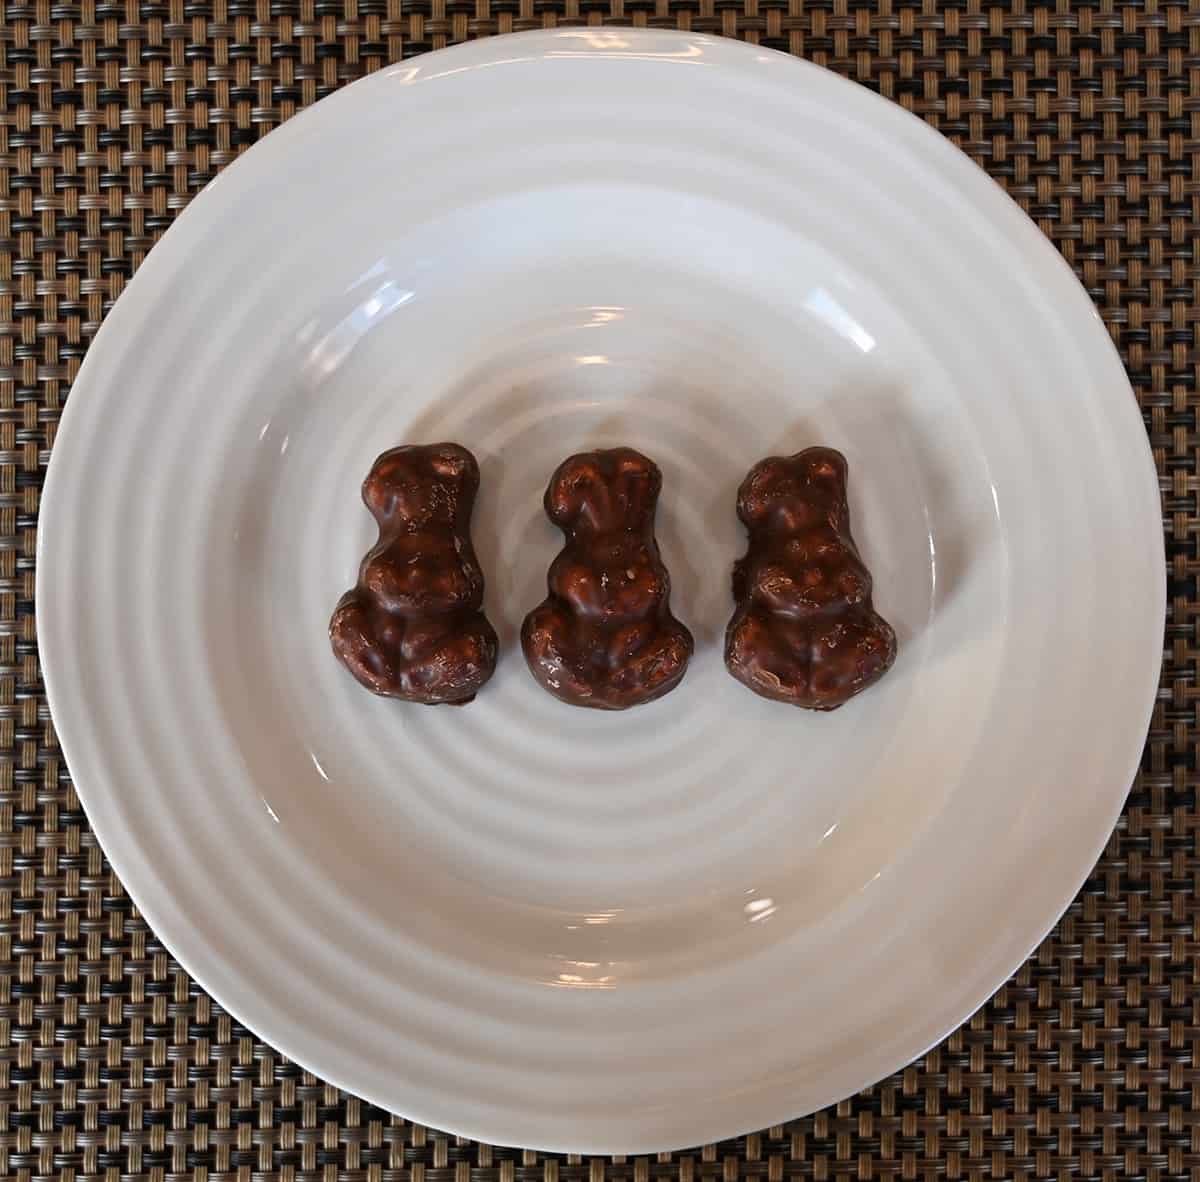 Top down image of three marshmallow chocolate bunnies sitting on a white plate.